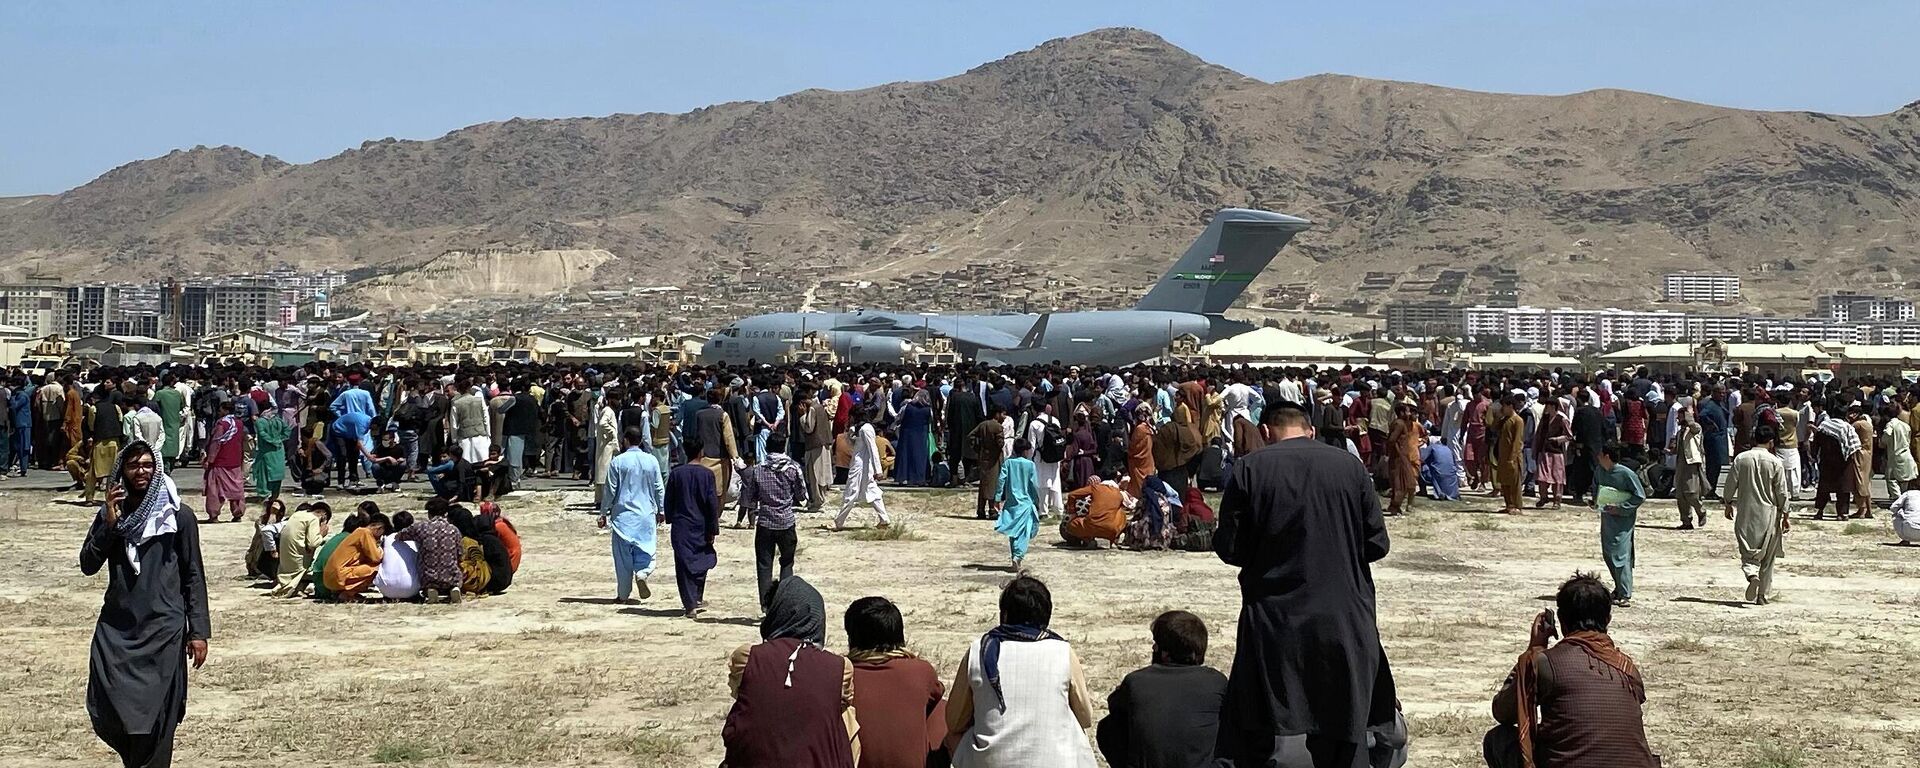  In this Aug. 16, 2021, file photo, hundreds of people gather near a U.S. Air Force C-17 transport plane at the perimeter of the international airport in Kabul, Afghanistan. Ordinary Americans and the nation's airlines are combining to donate miles and cash to help Afghan refugees resettle in the United States. Organizers said Tuesday, Oct. 26, they have raised enough donations pay for 40,000 flights, but they're hoping to nearly double that amount.  - Sputnik International, 1920, 22.06.2022